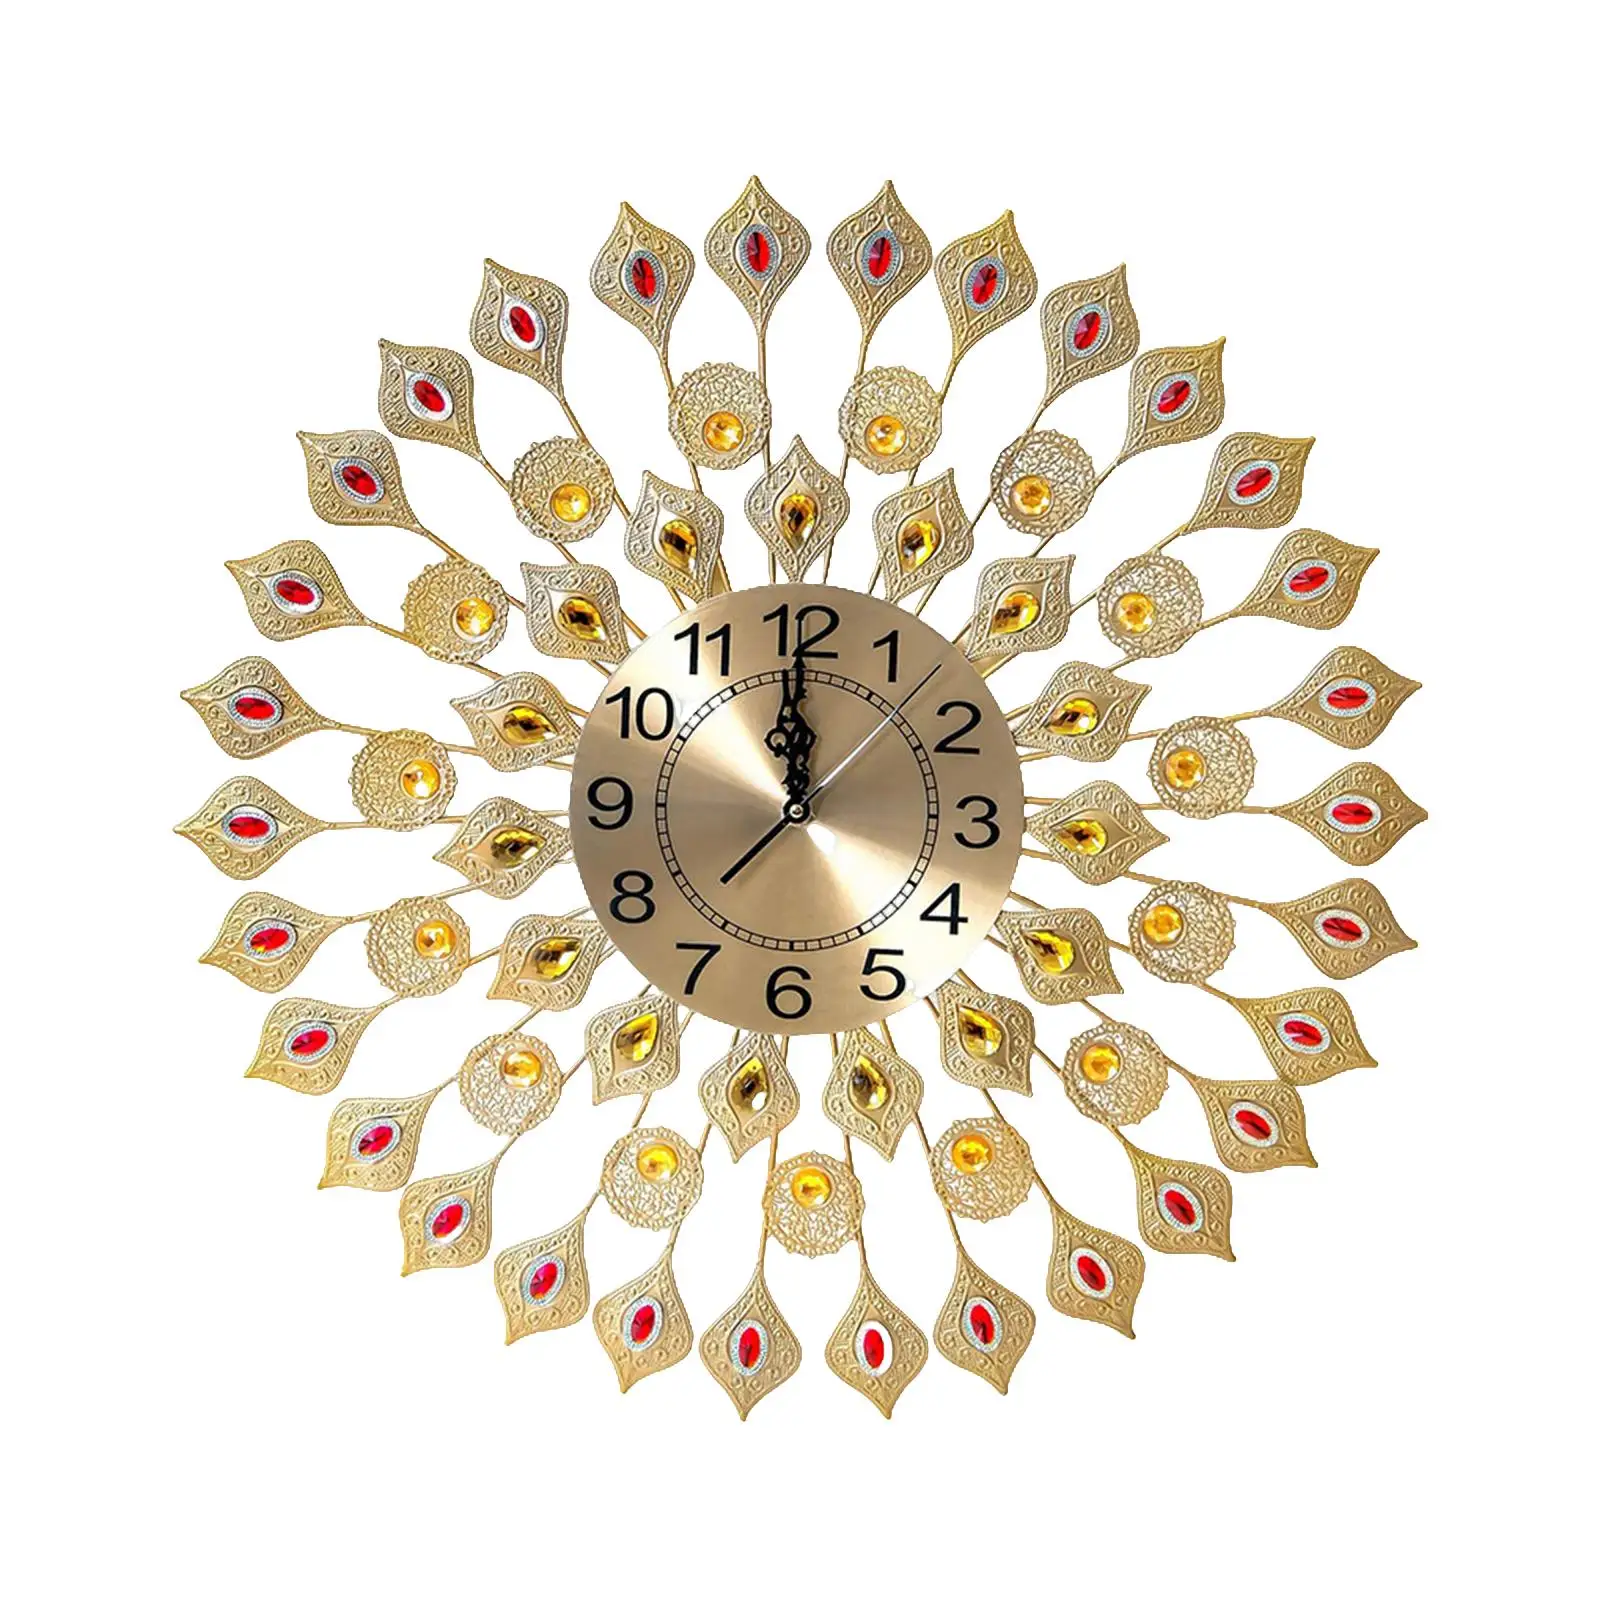 Large Peacock Wall Clock Non Ticking Big Wall Clock for Bedroom Office Decor